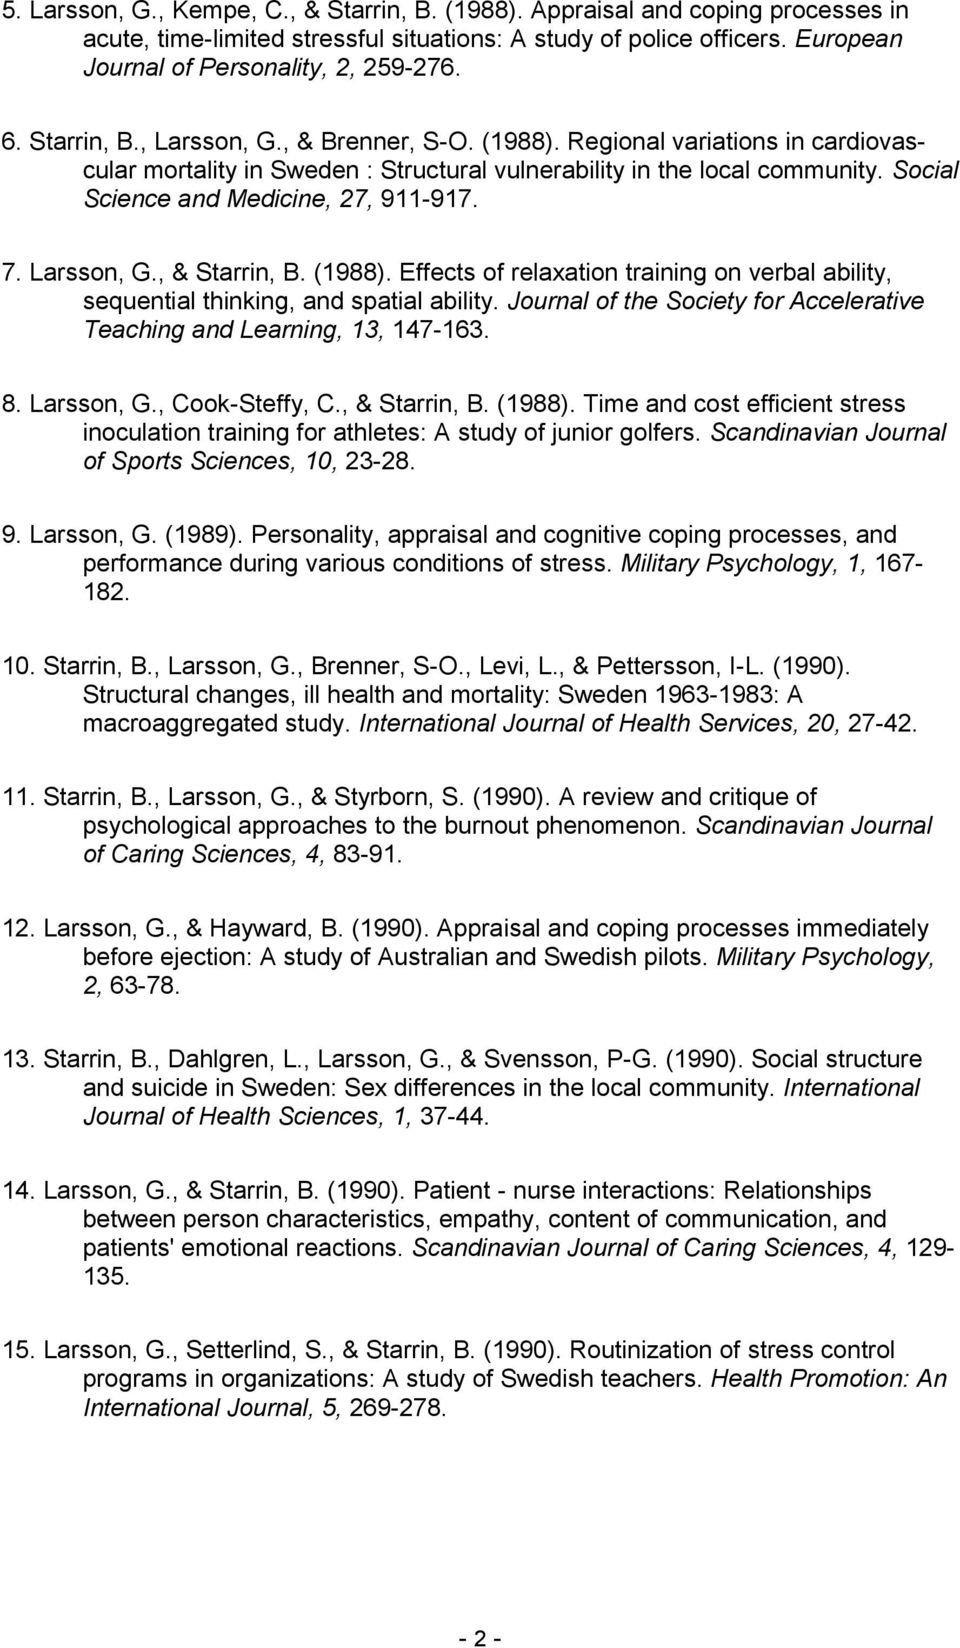 7. Larsson, G., & Starrin, B. (1988). Effects of relaxation training on verbal ability, sequential thinking, and spatial ability.